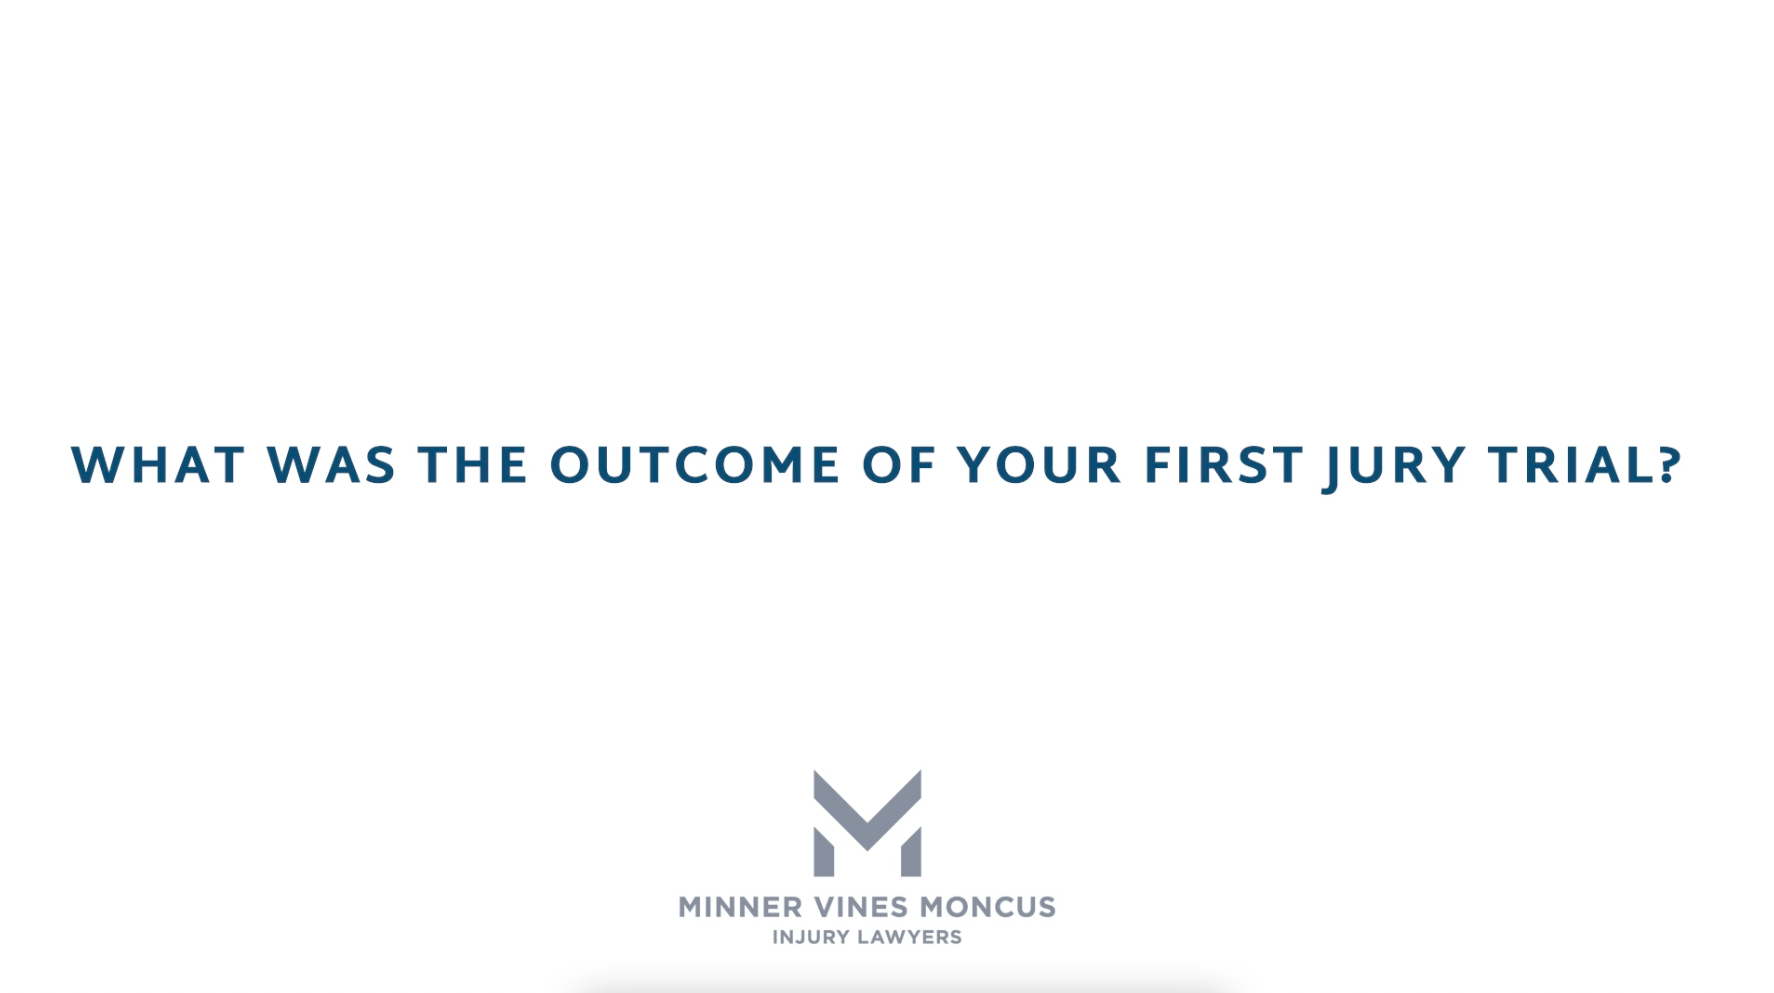 What was the outcome of your first jury trial?